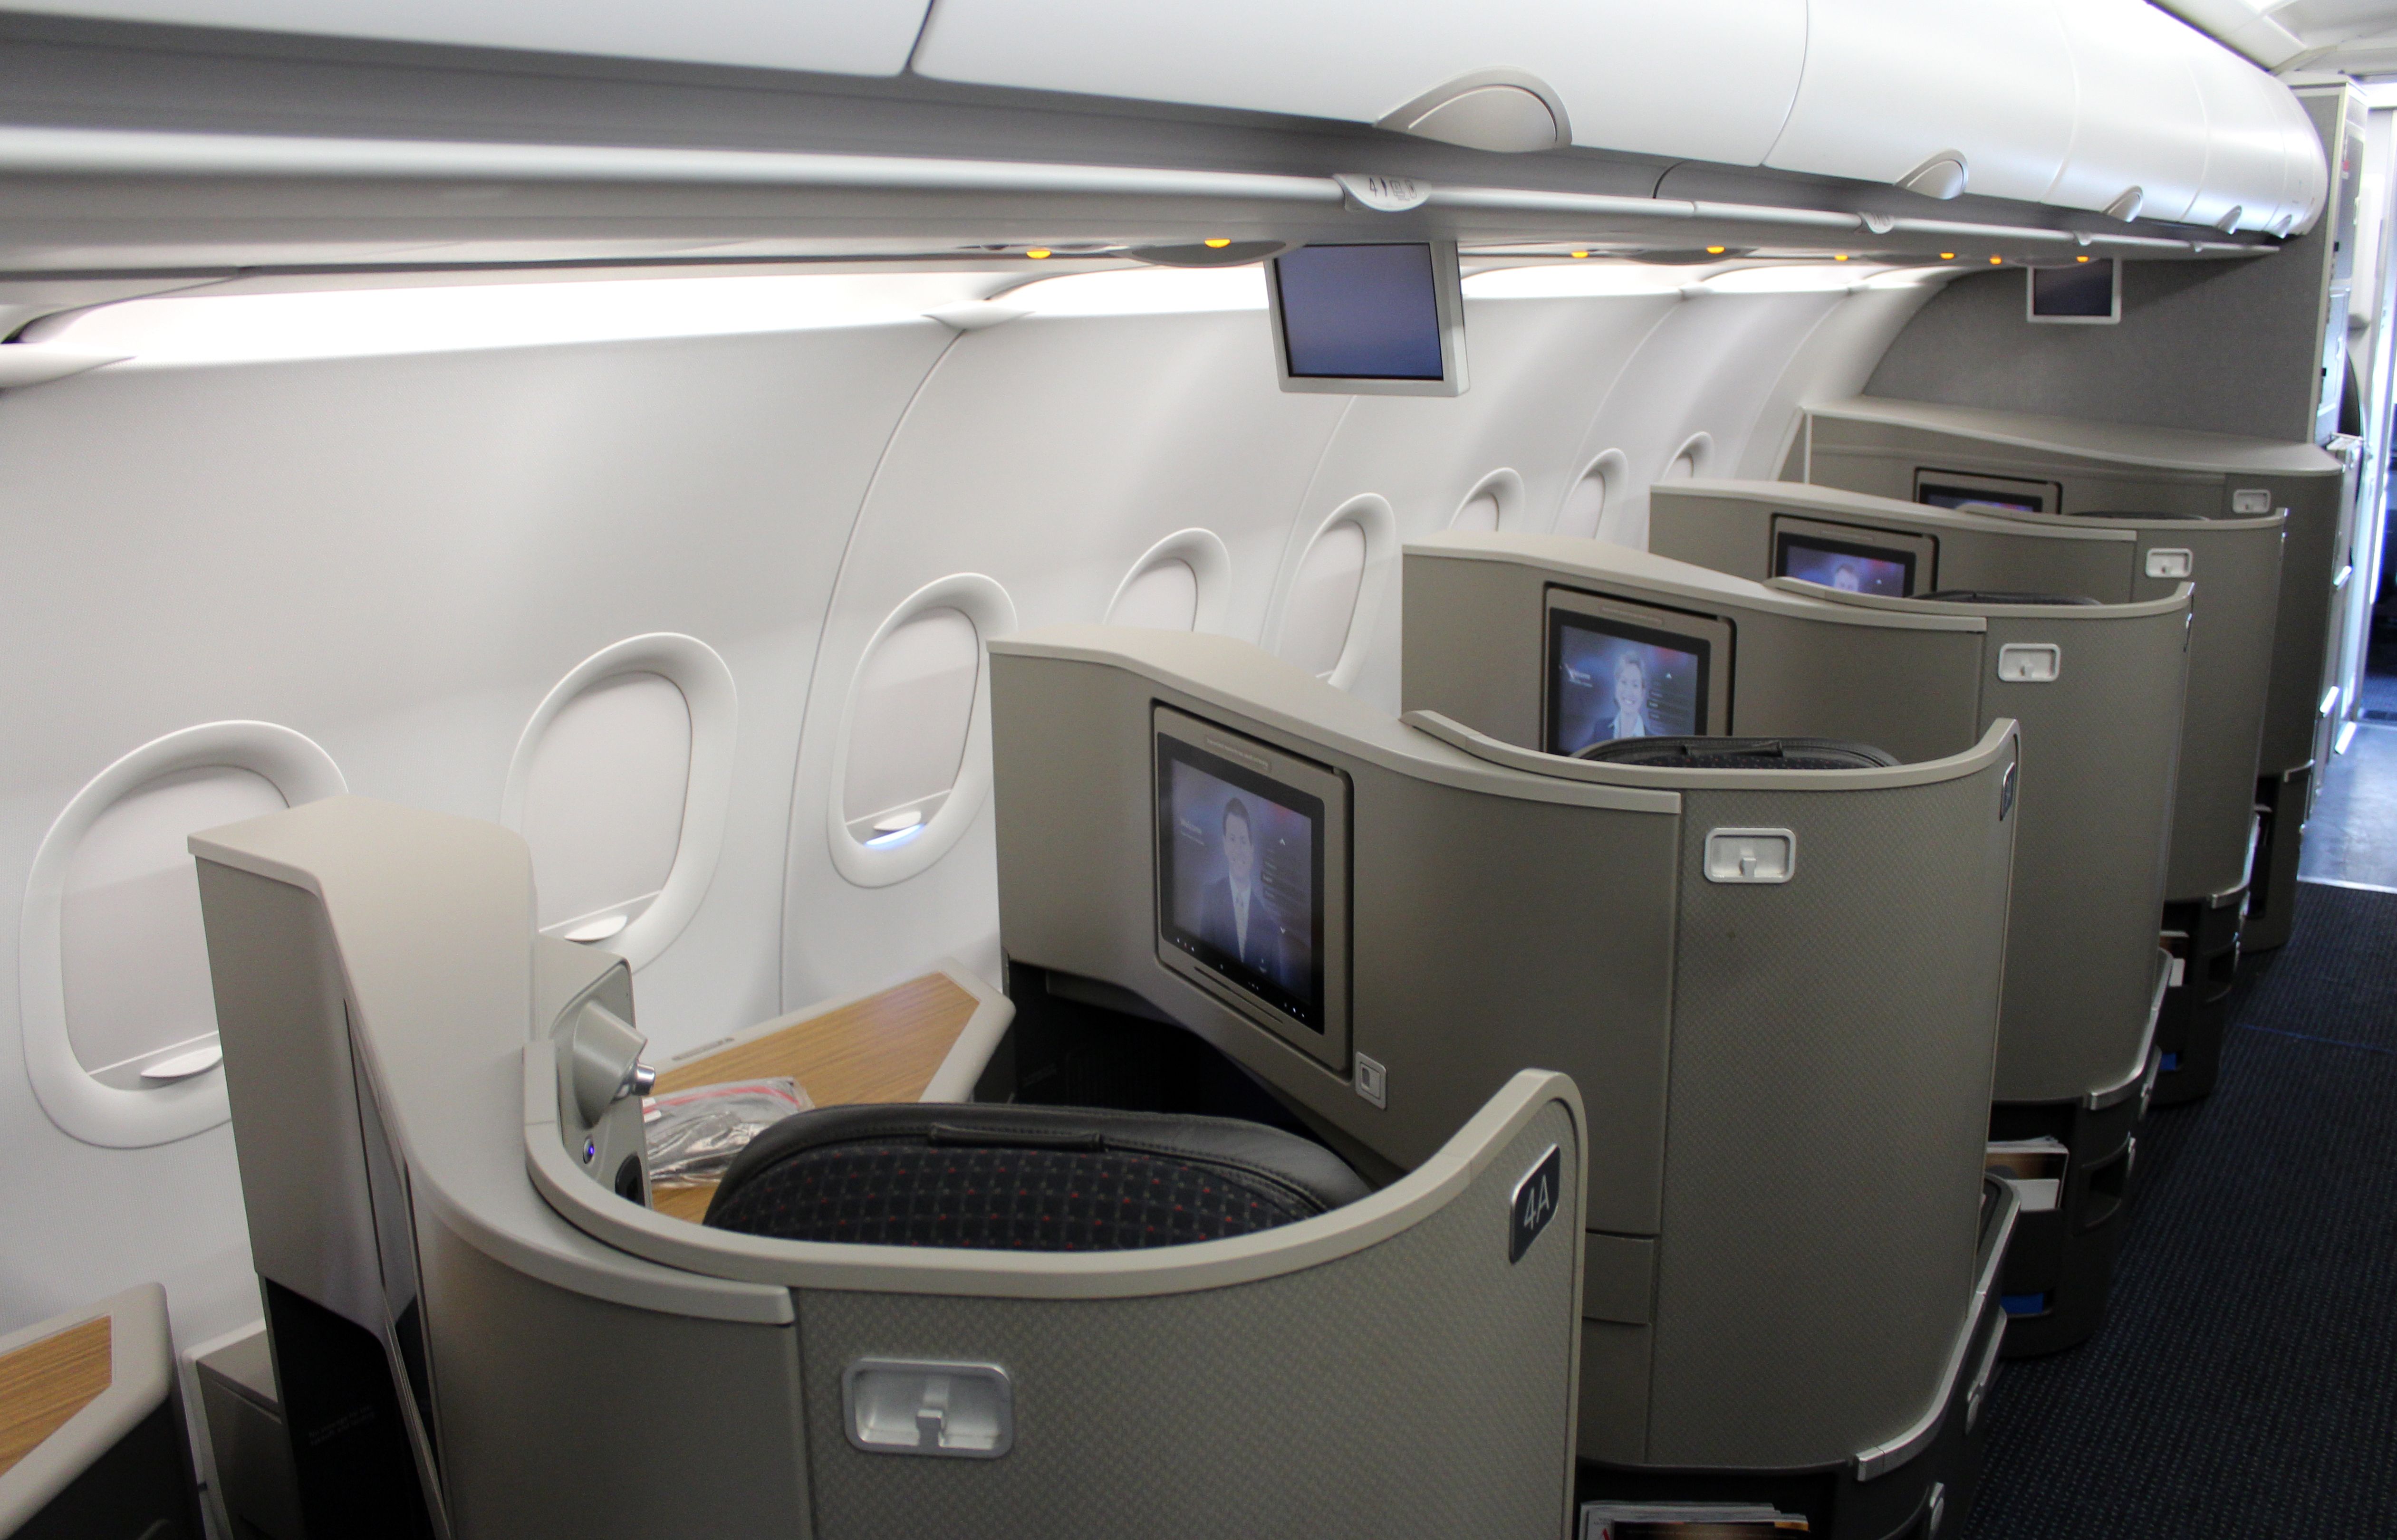 Inside the American Airlines A321 Transcontinental First class cabin.